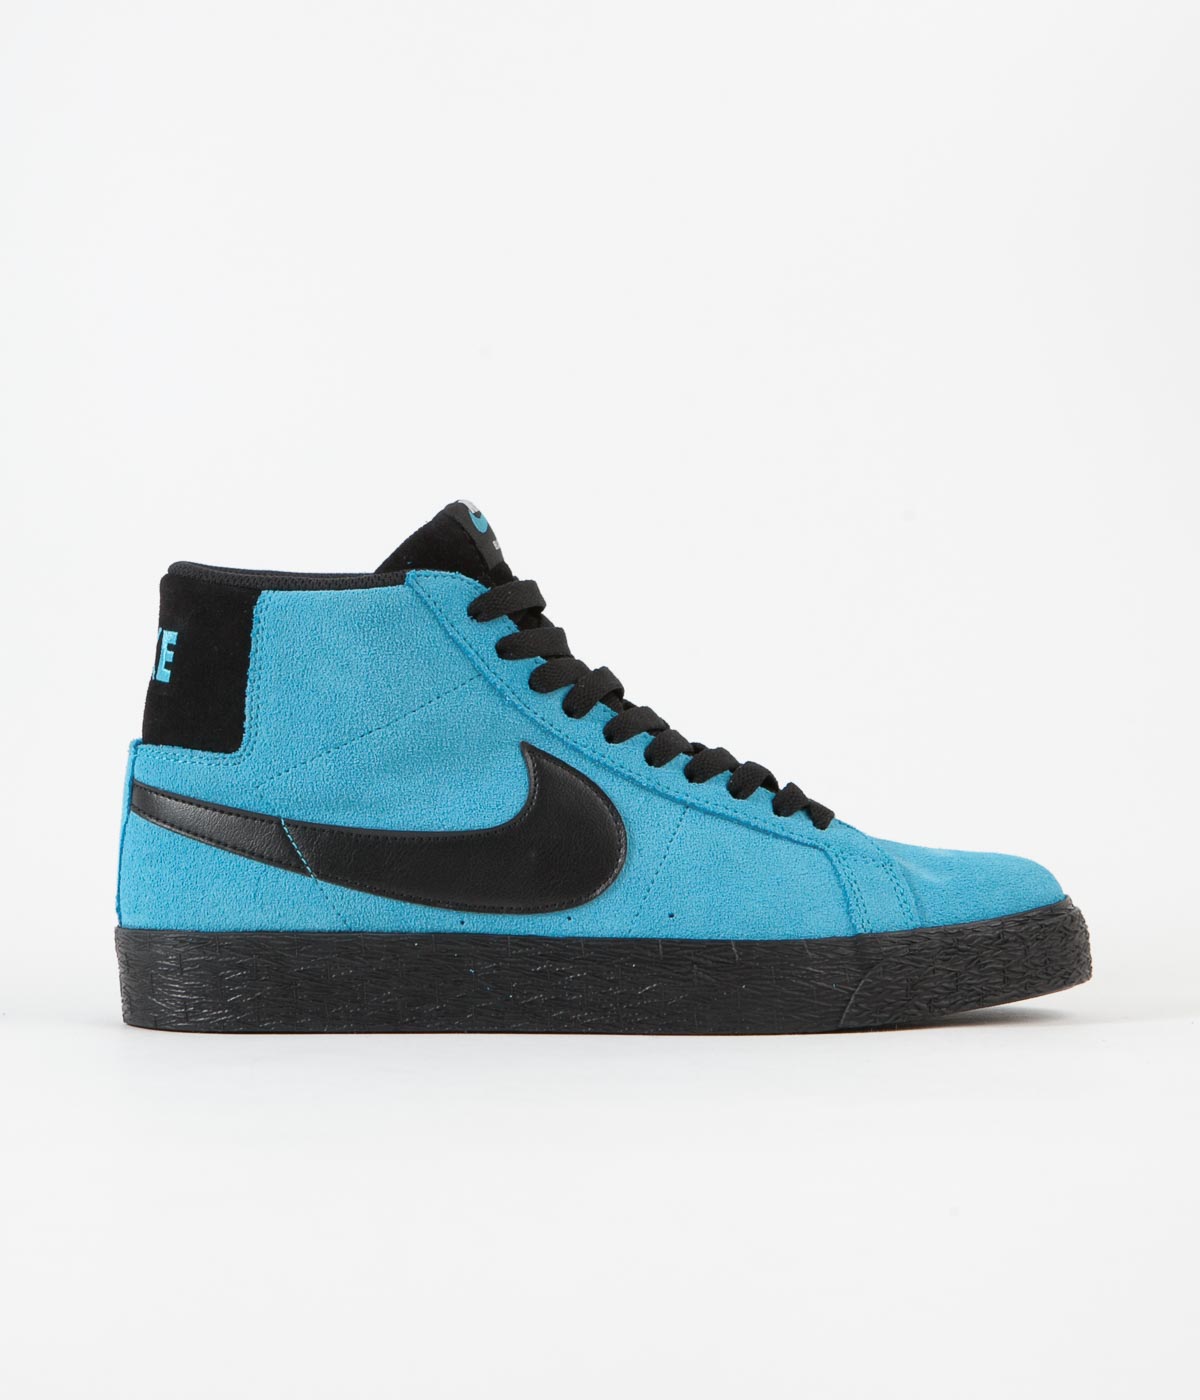 nike shoes blue black and white